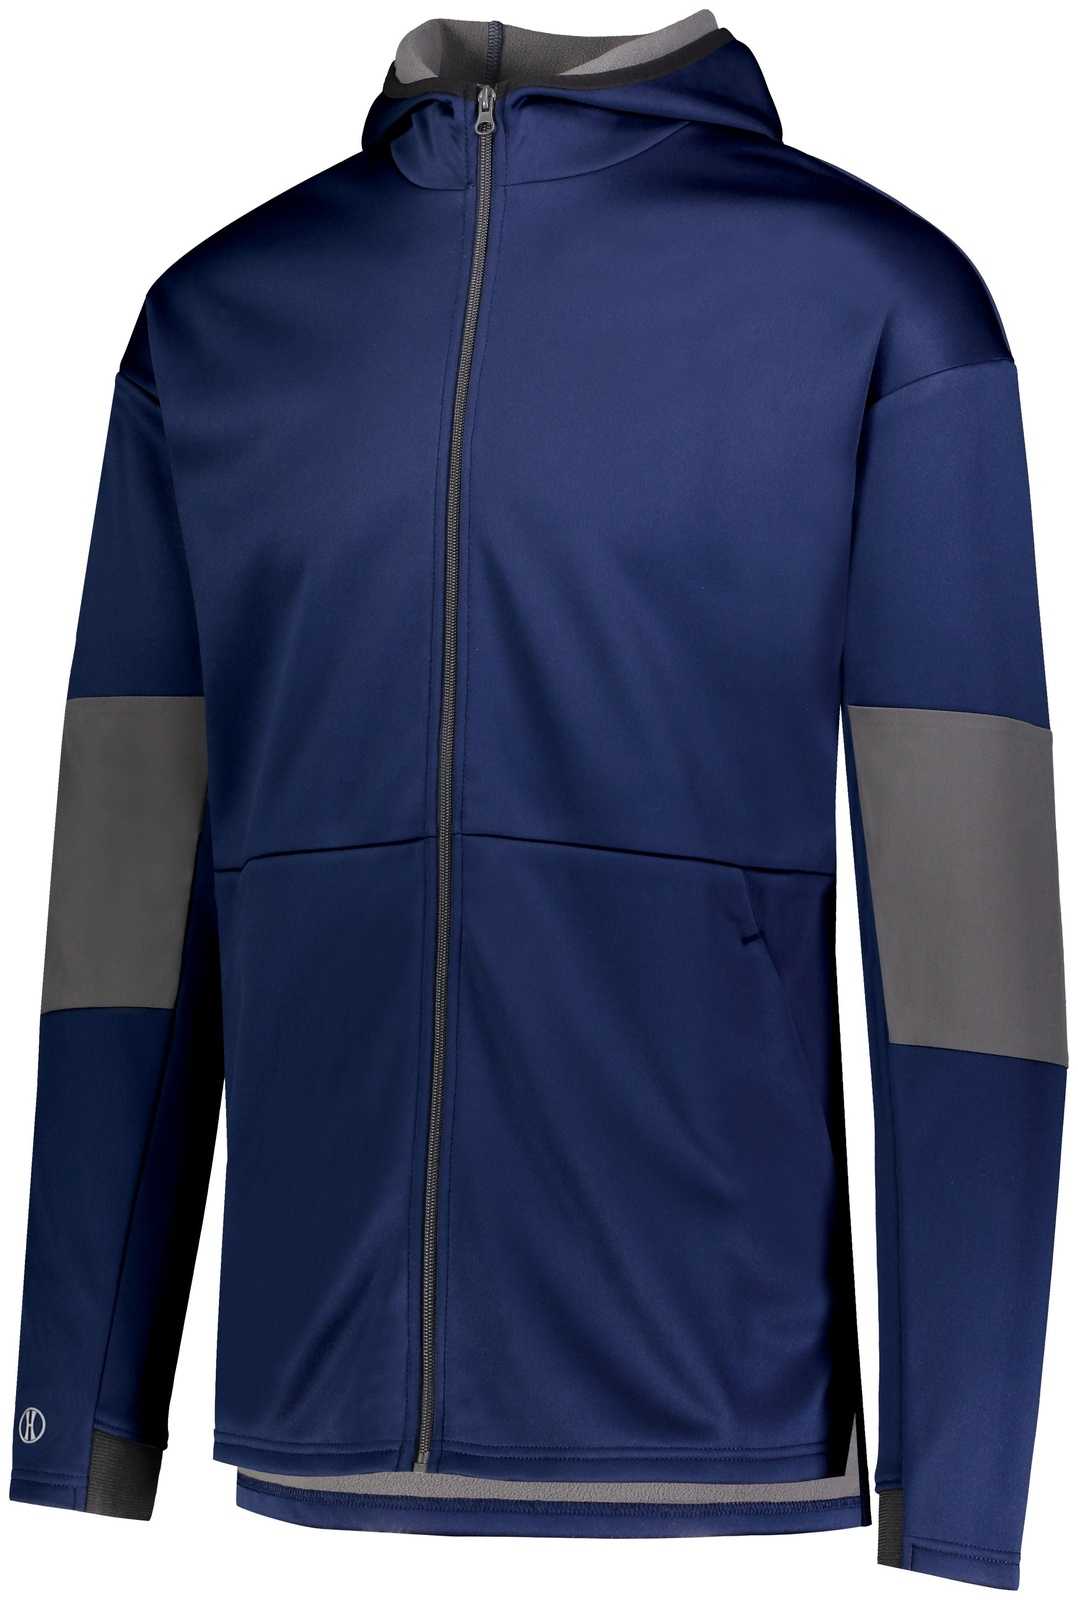 Holloway 229537 Sof-Stretch Jacket - Navy Carbon - HIT a Double